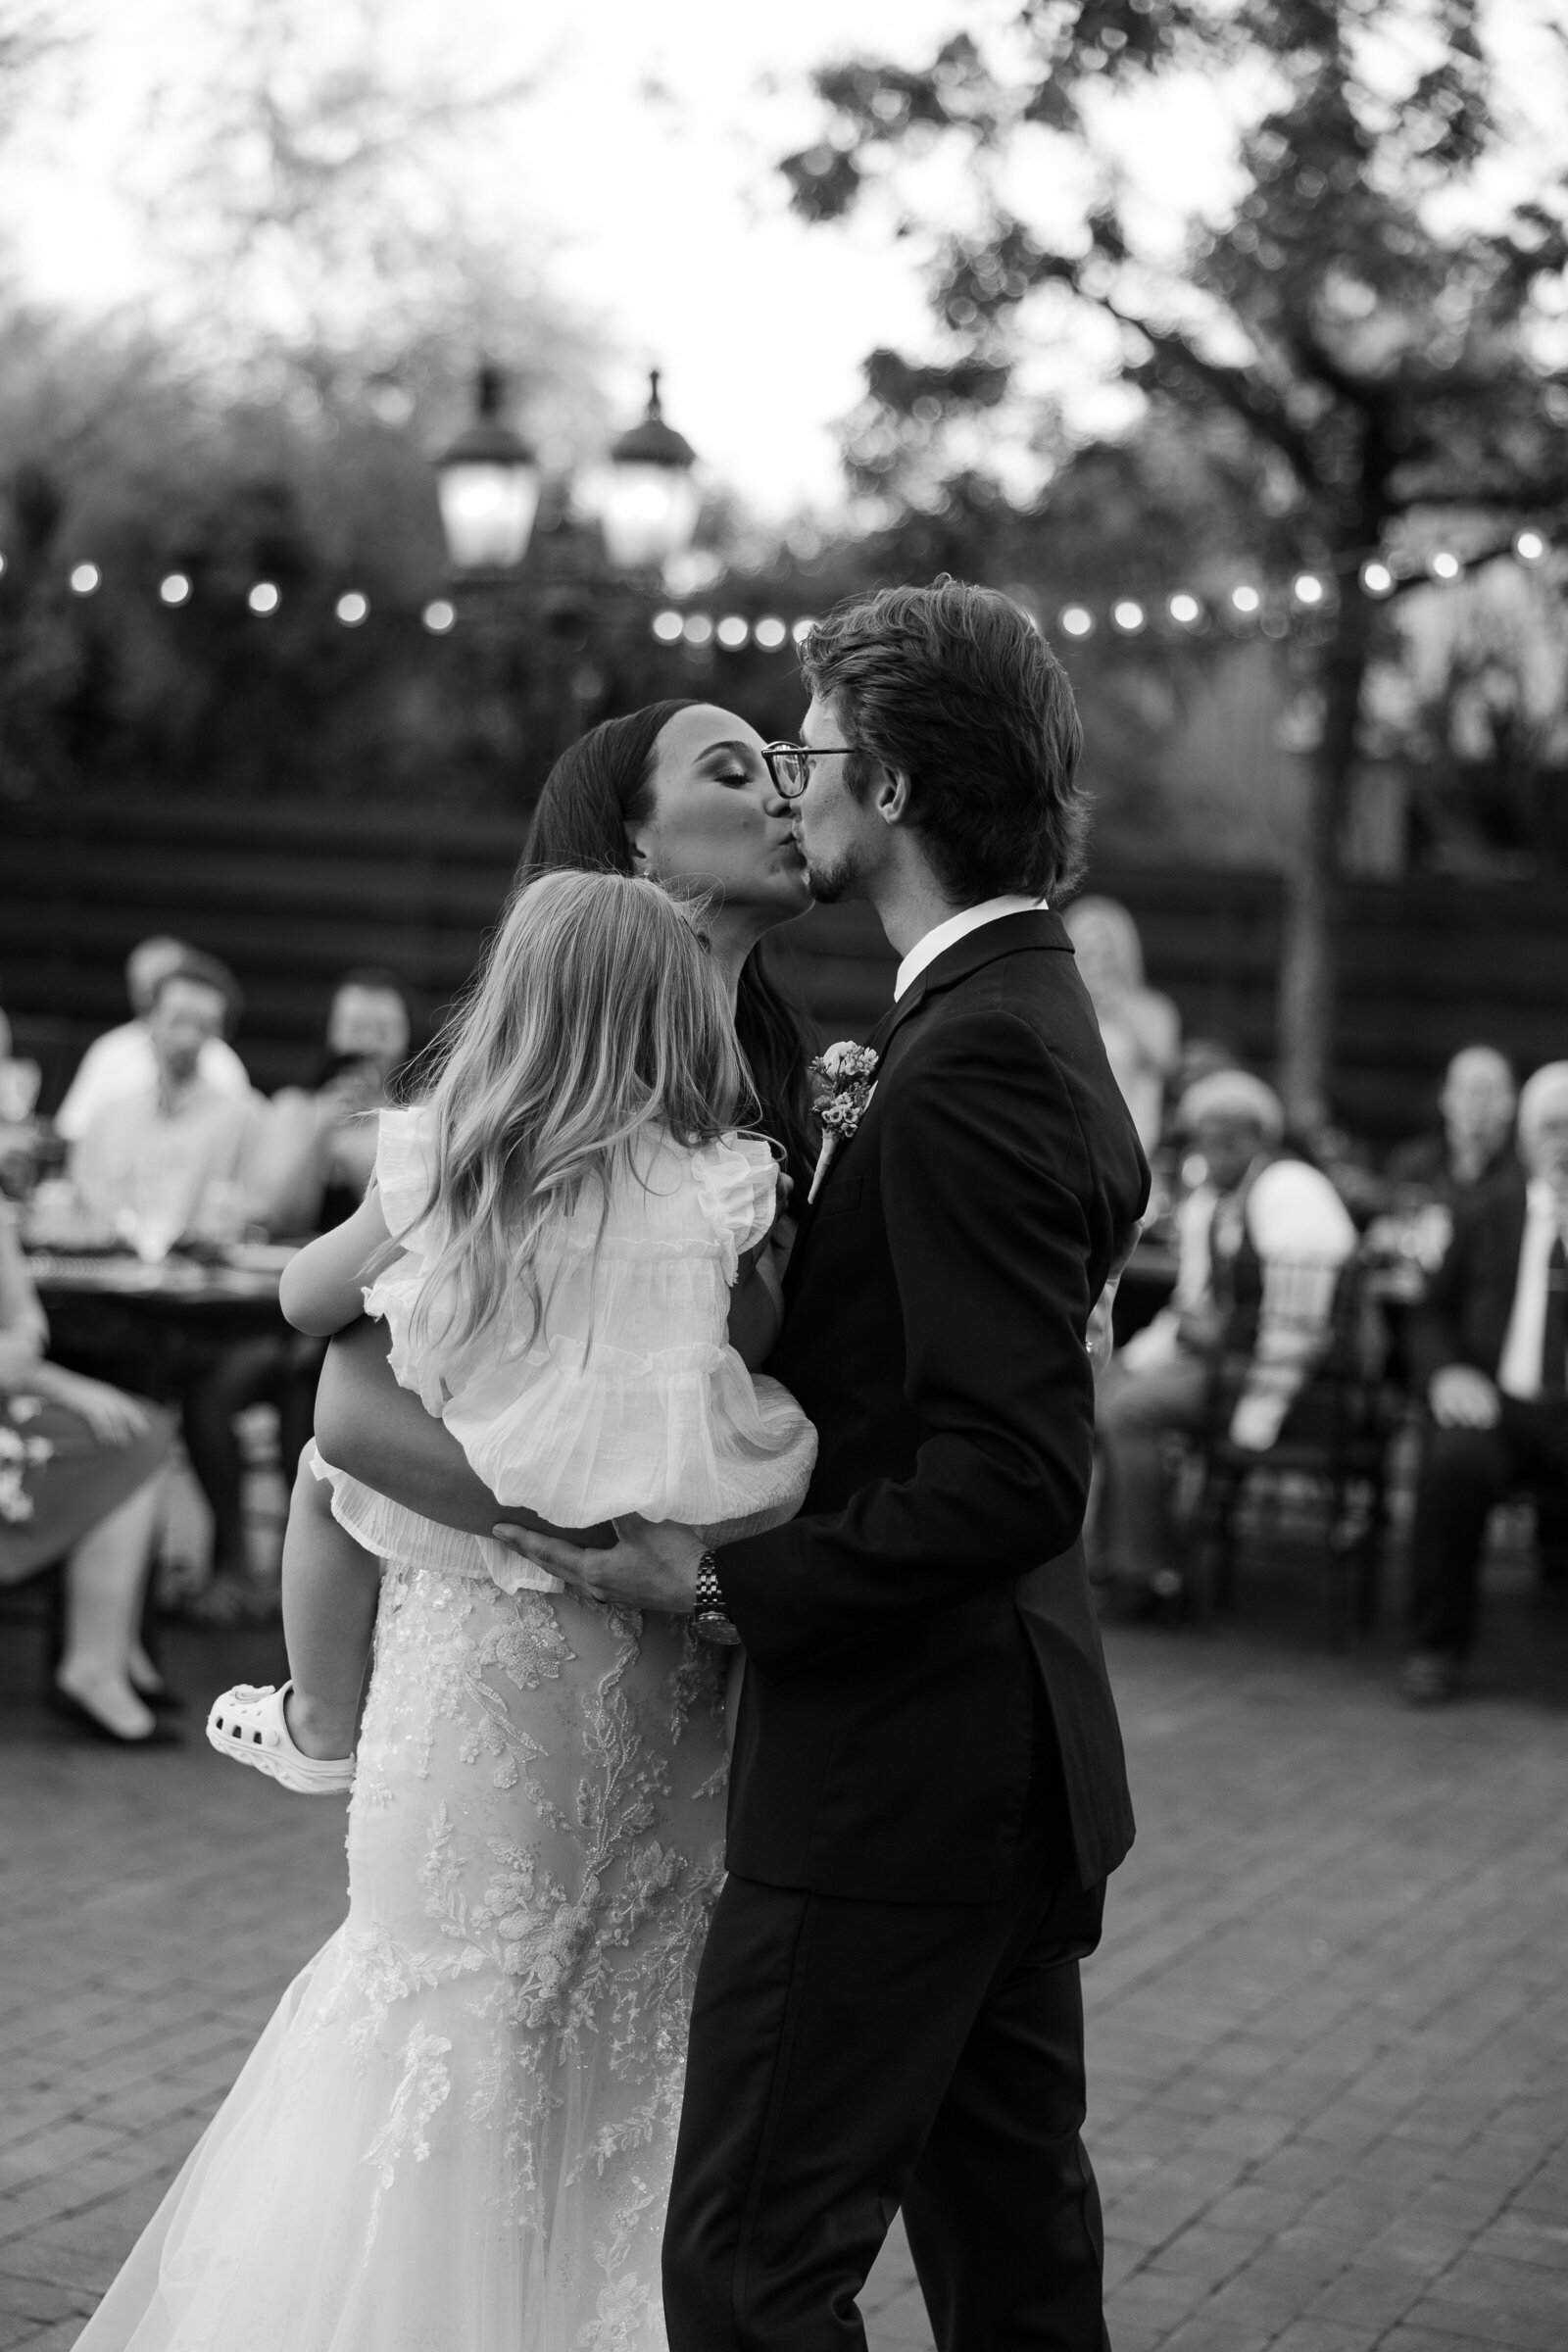 A bride and groom kissing while they hold a small child.